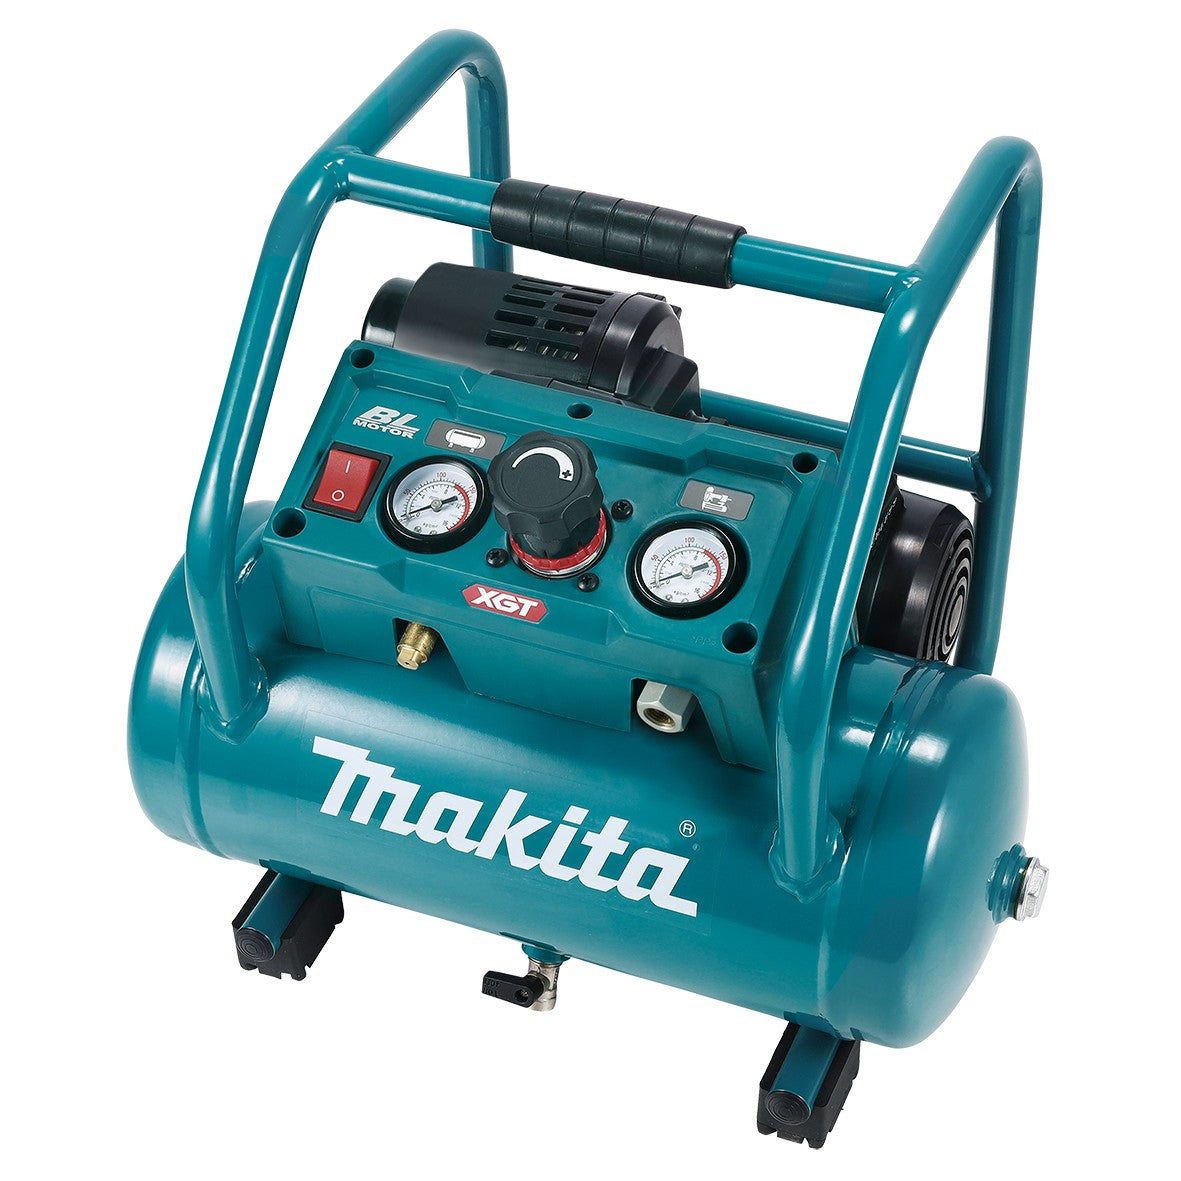 40V Max Brushless Air Compressor Bare (Tool Only) AC001GZ by Makita